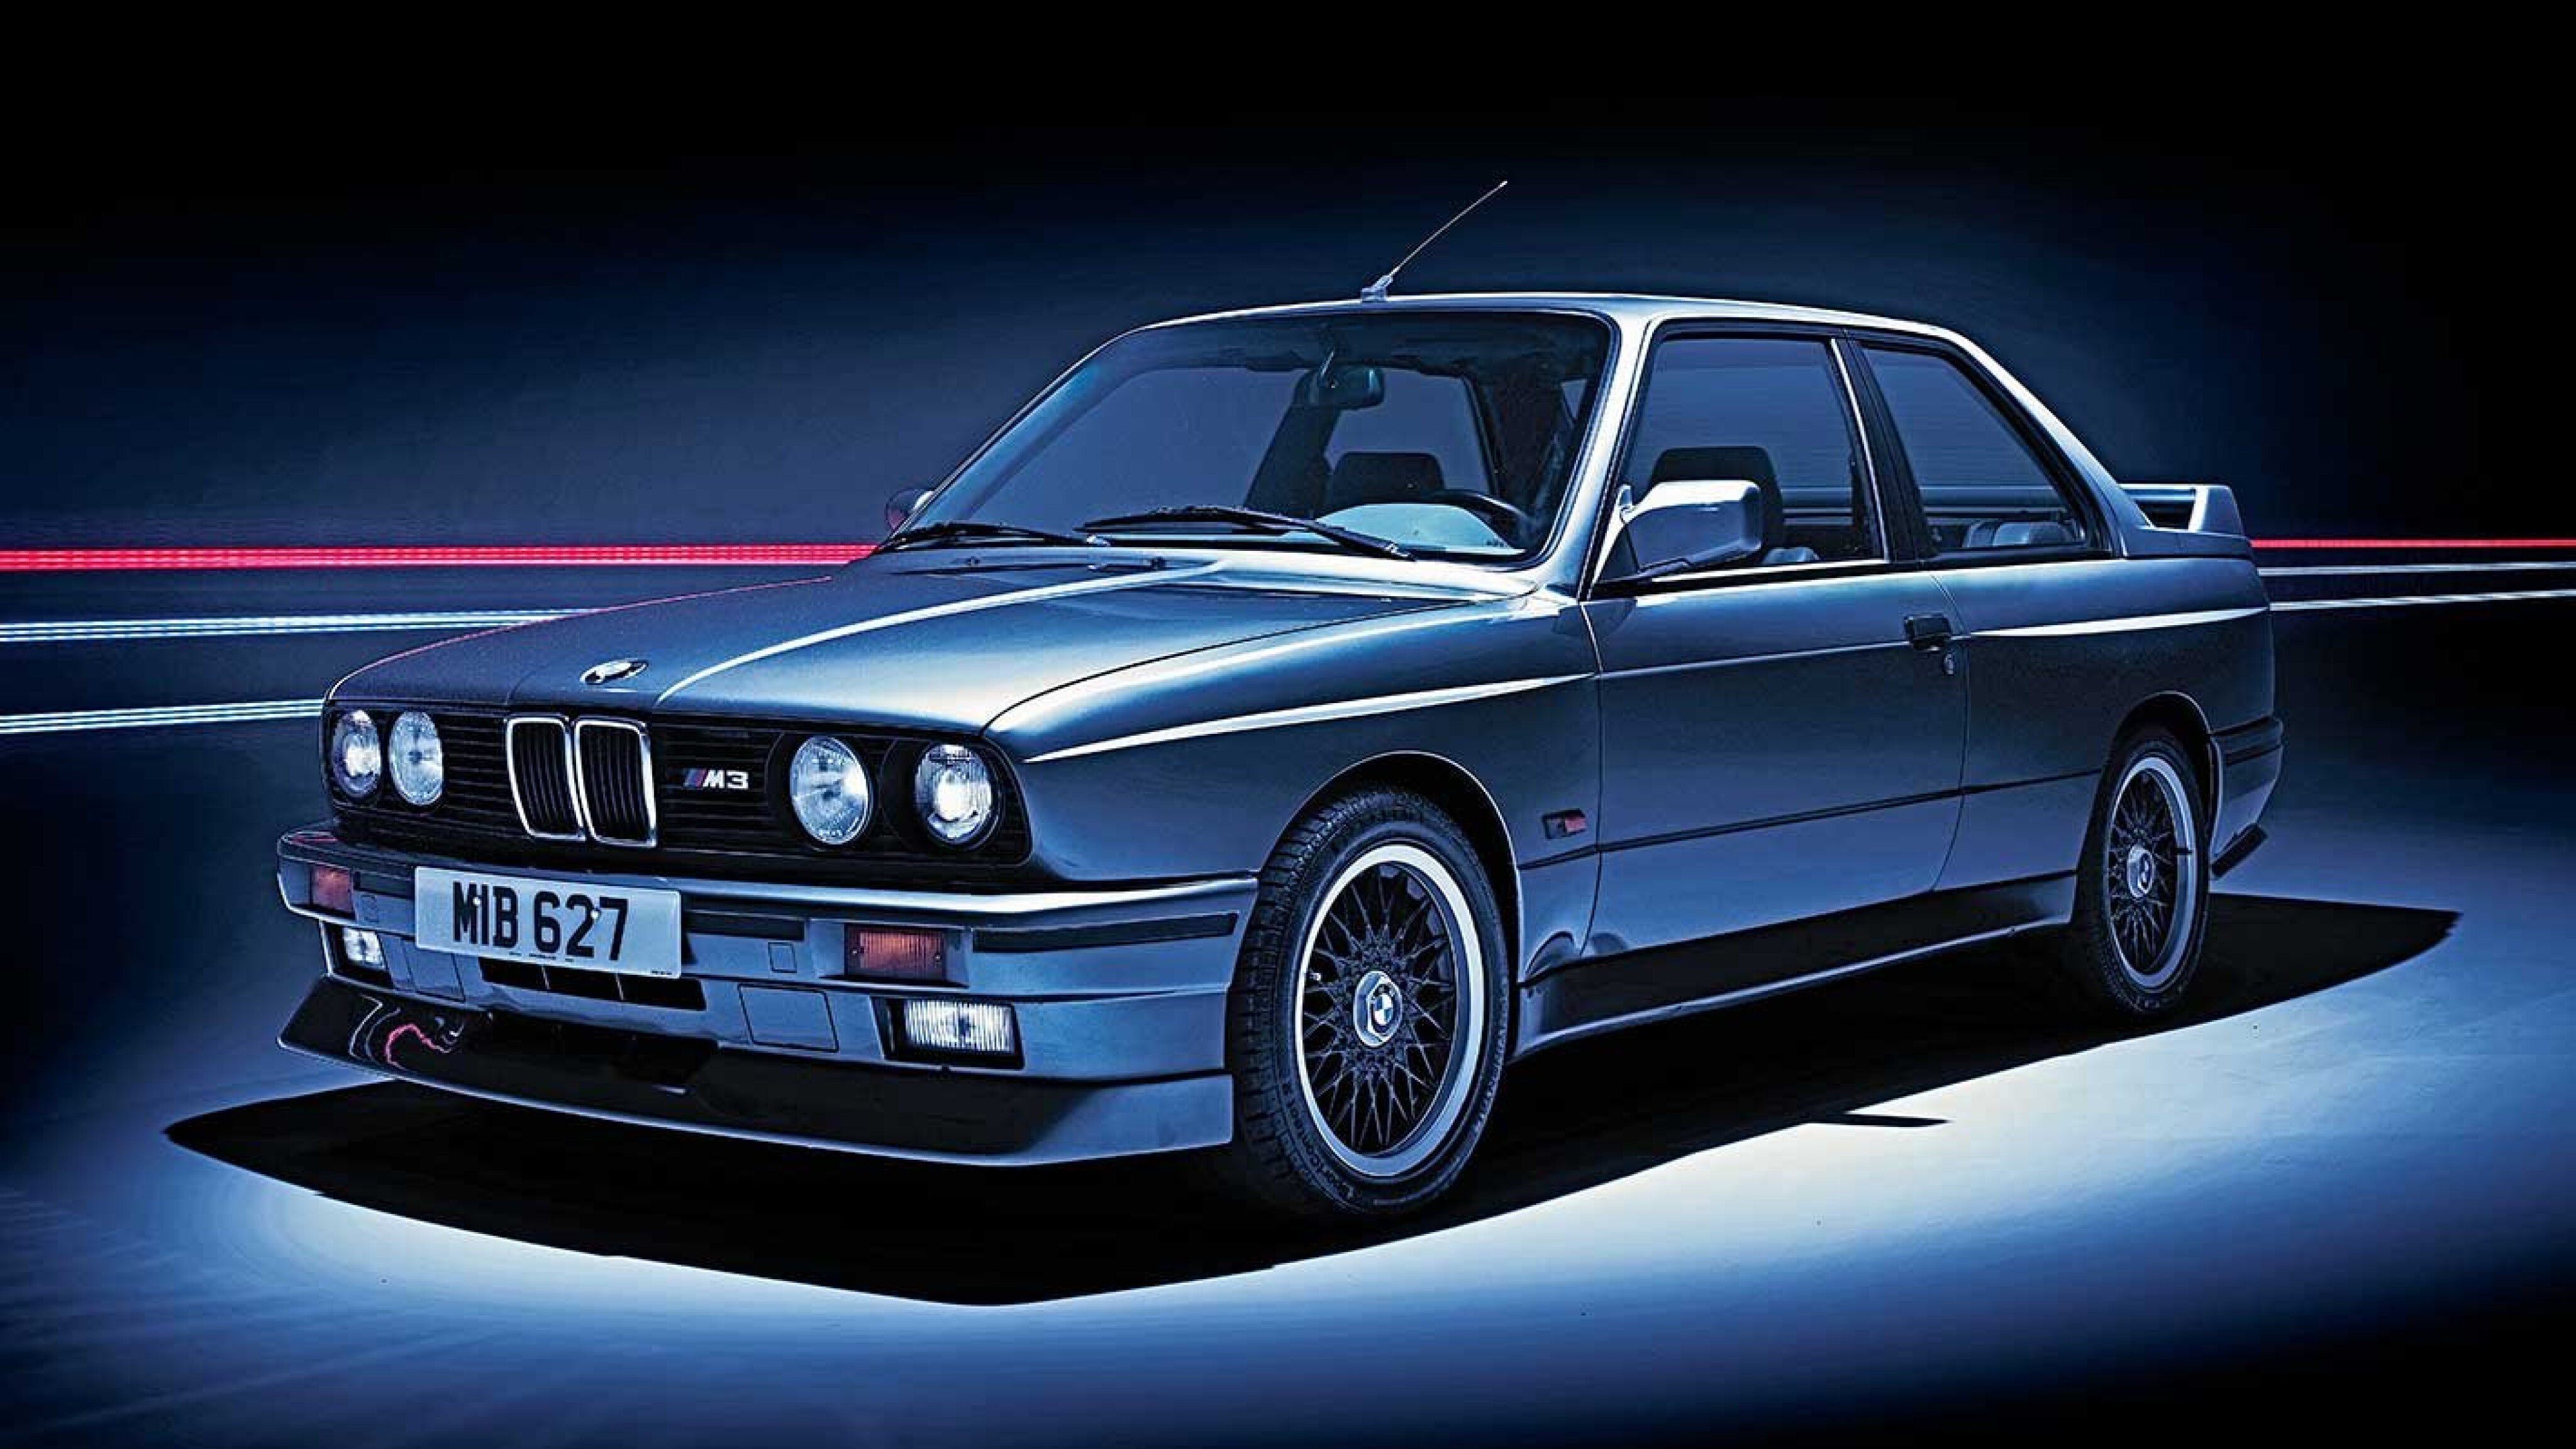 Features of the BMW M3 E30 USA: Differences to the European model